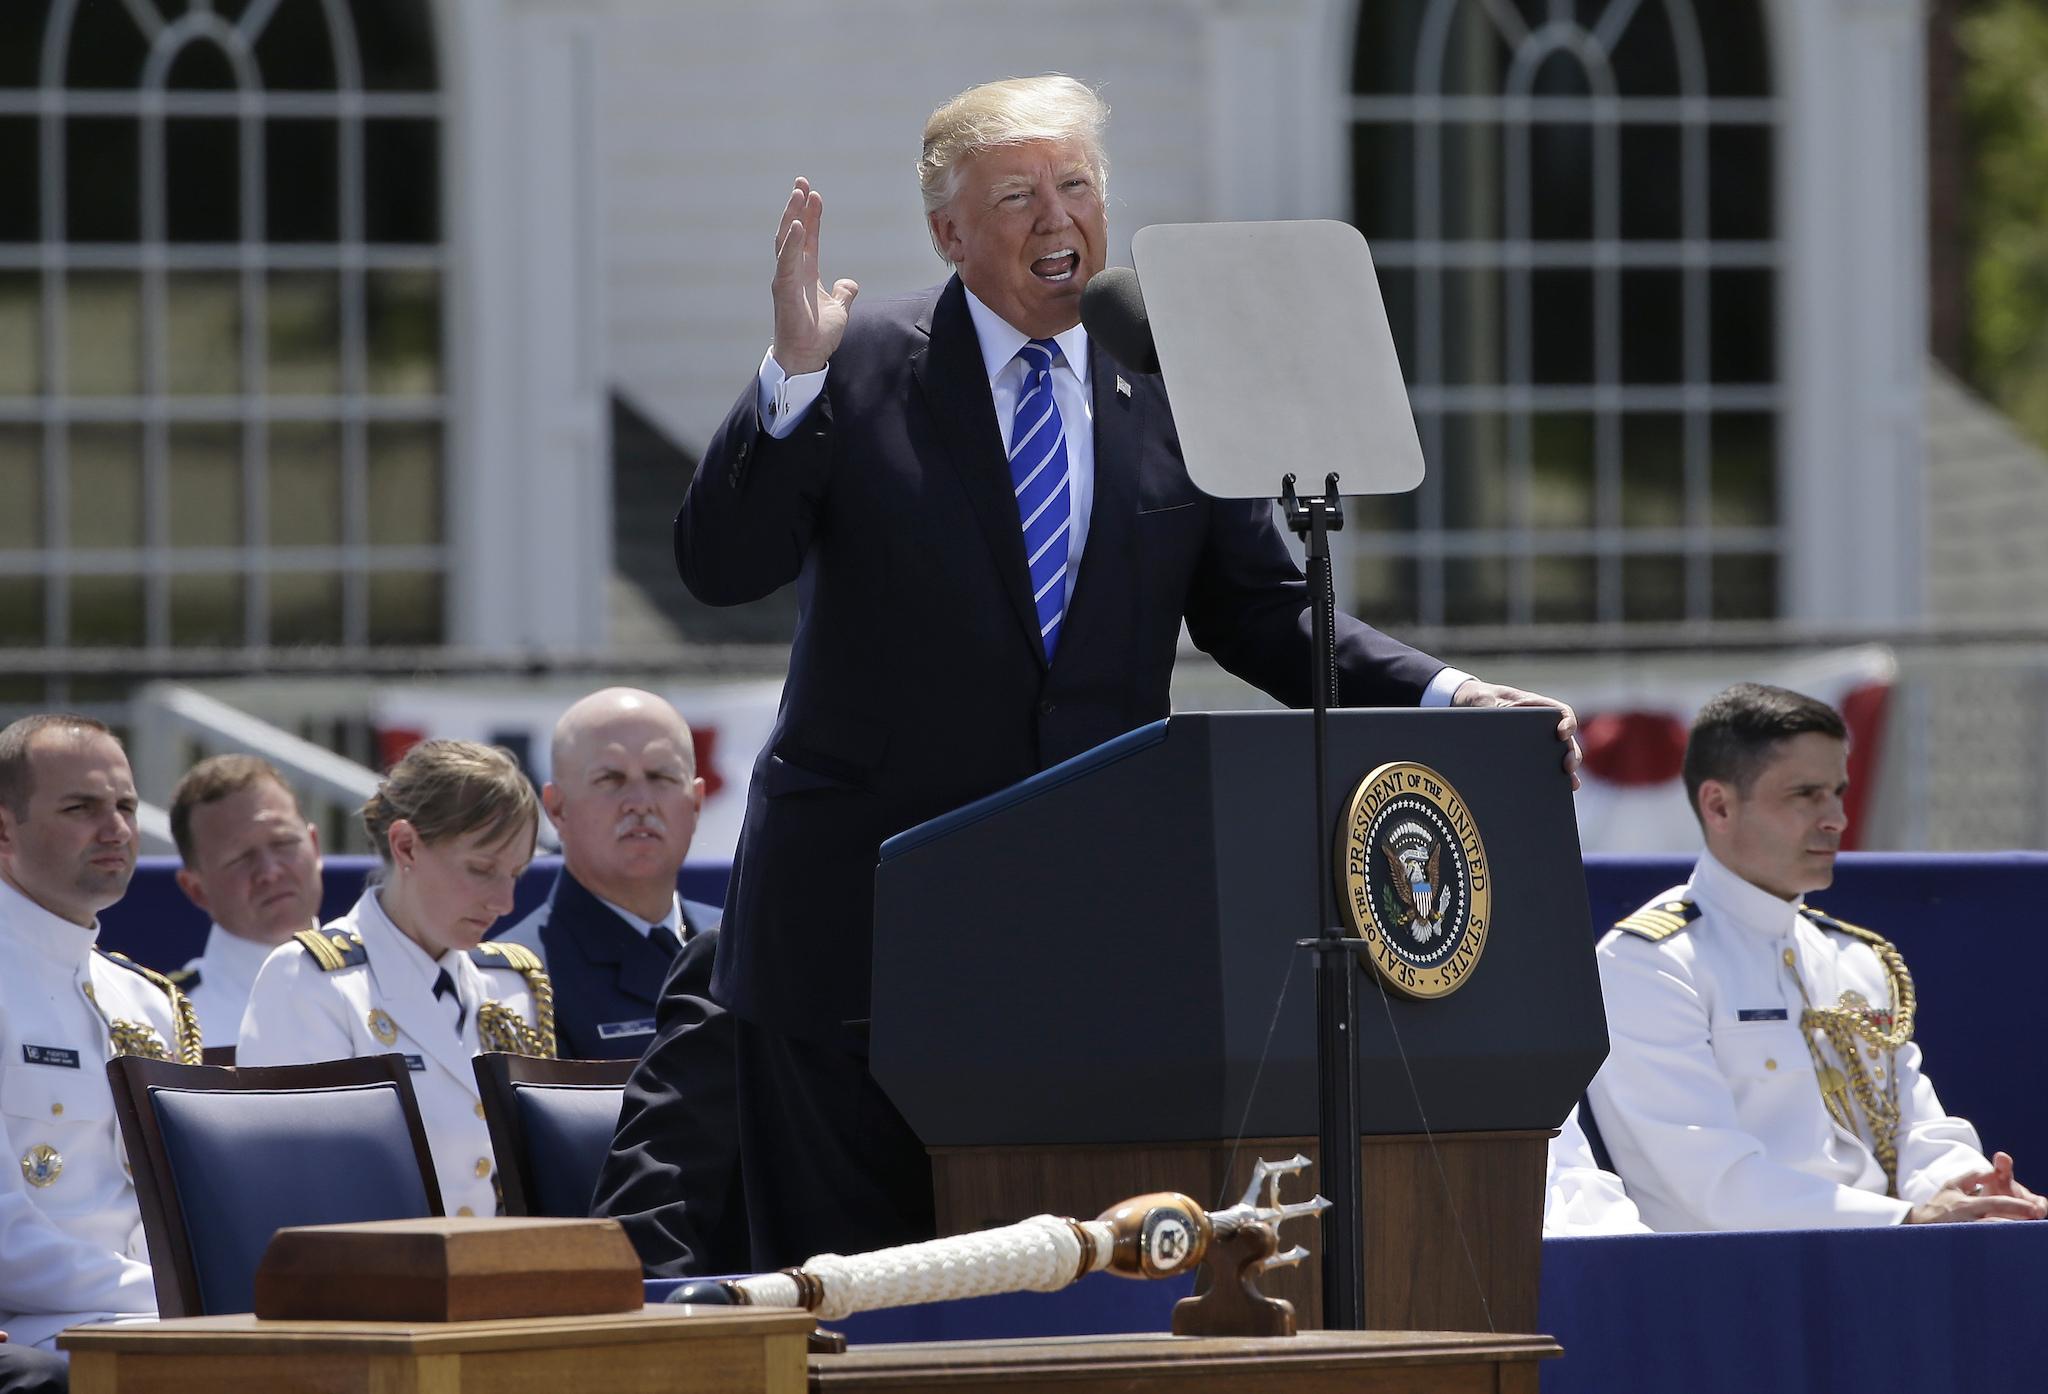 President Donald Trump gives his commencement address at the US Coast Guard Academy